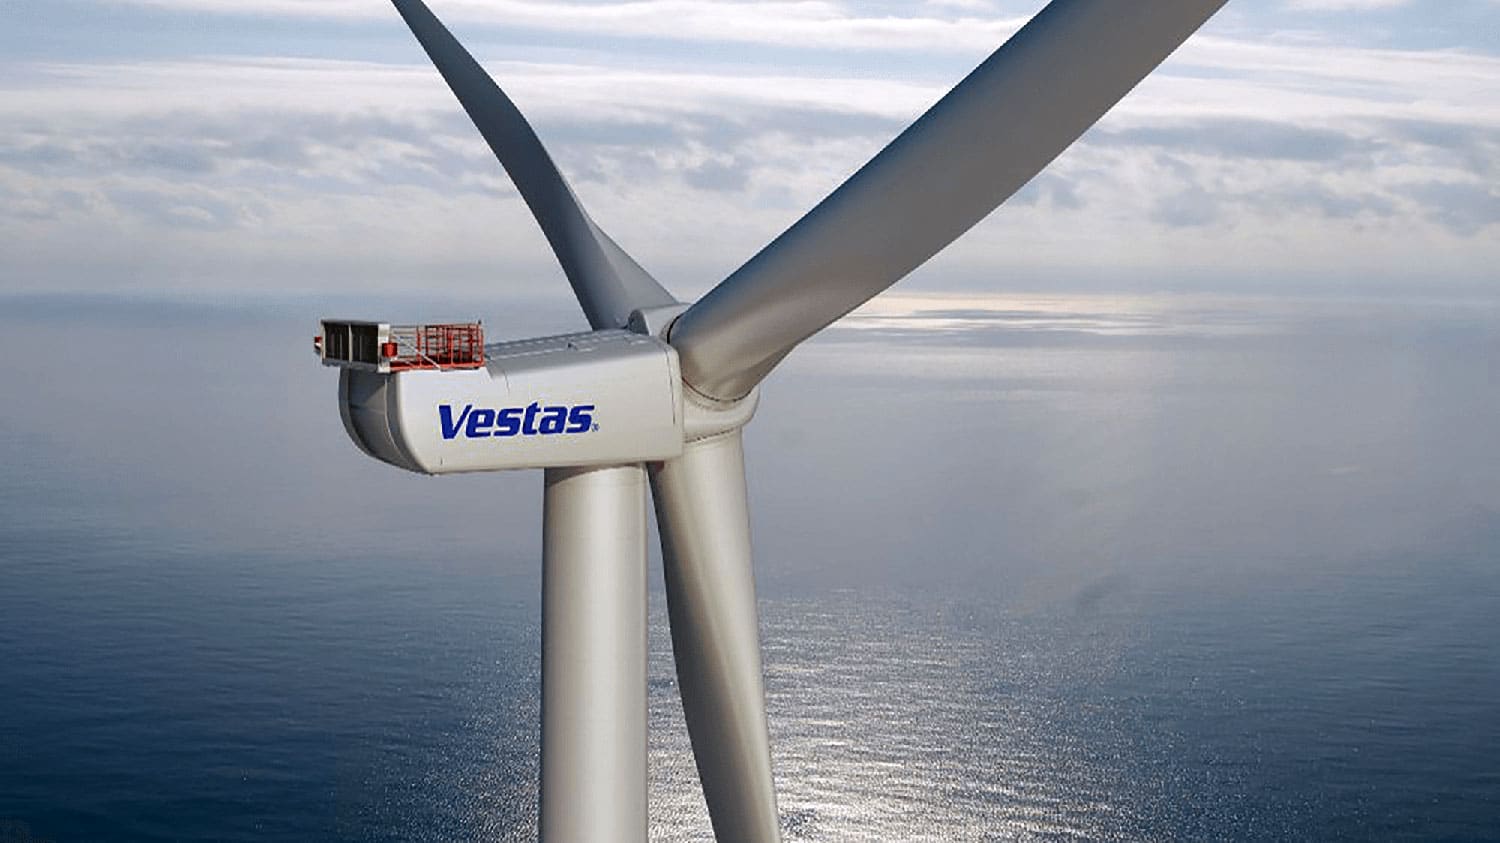 Vestas' CETEC project aims to make wind turbine blades fully recyclable.